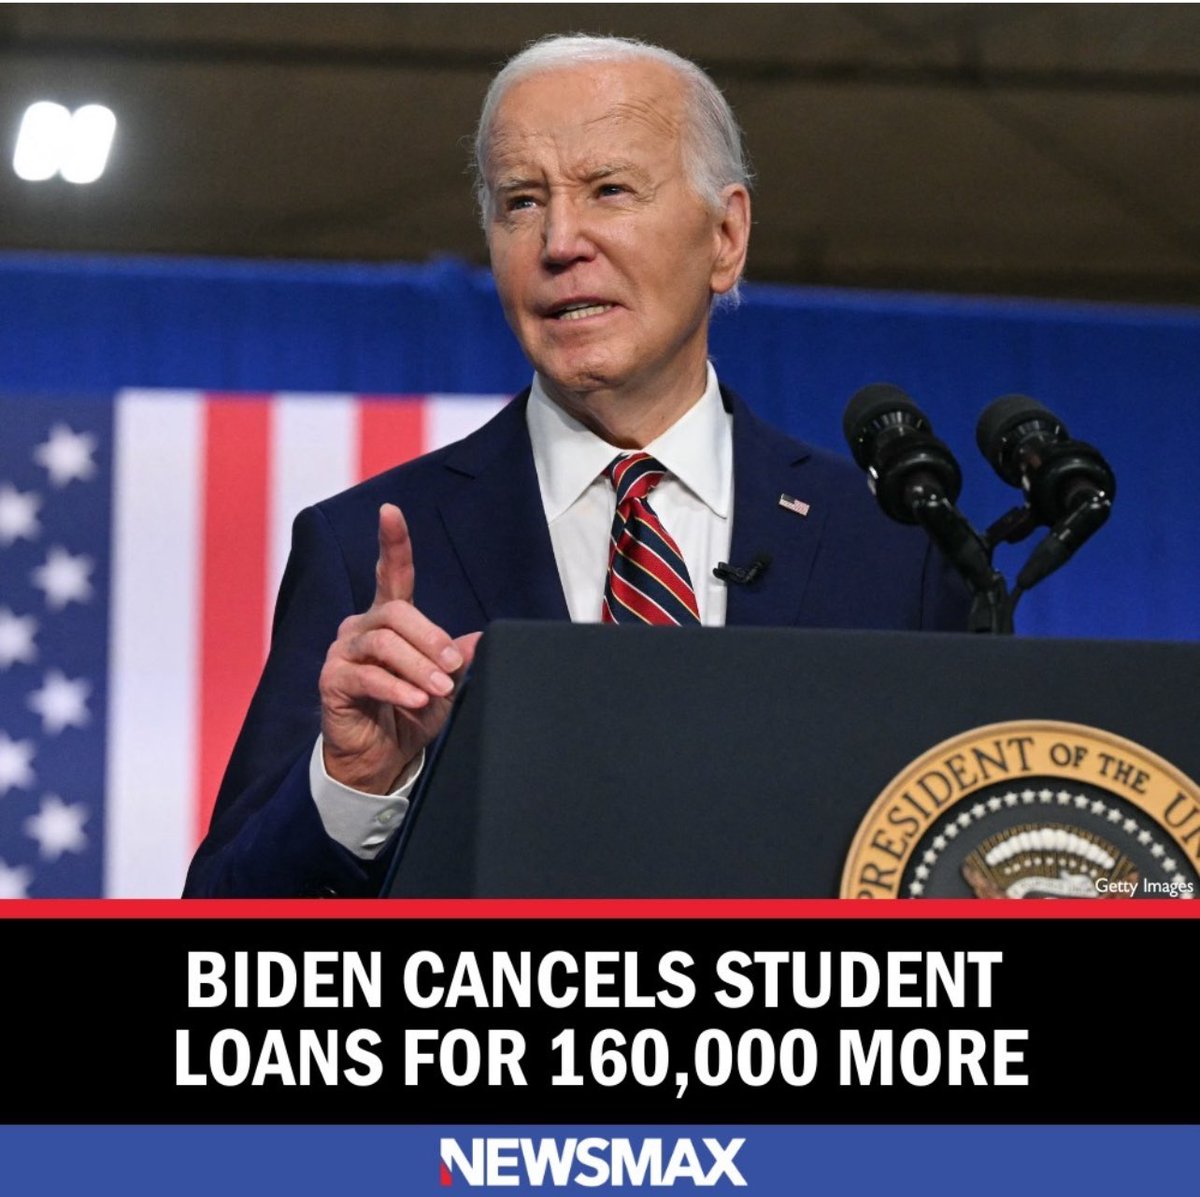 This clown continues to say he’s canceling student debt but he knows it’s unconstitutional and it’s all just a smokescreen to buy votes. #BidenNotMyPresident